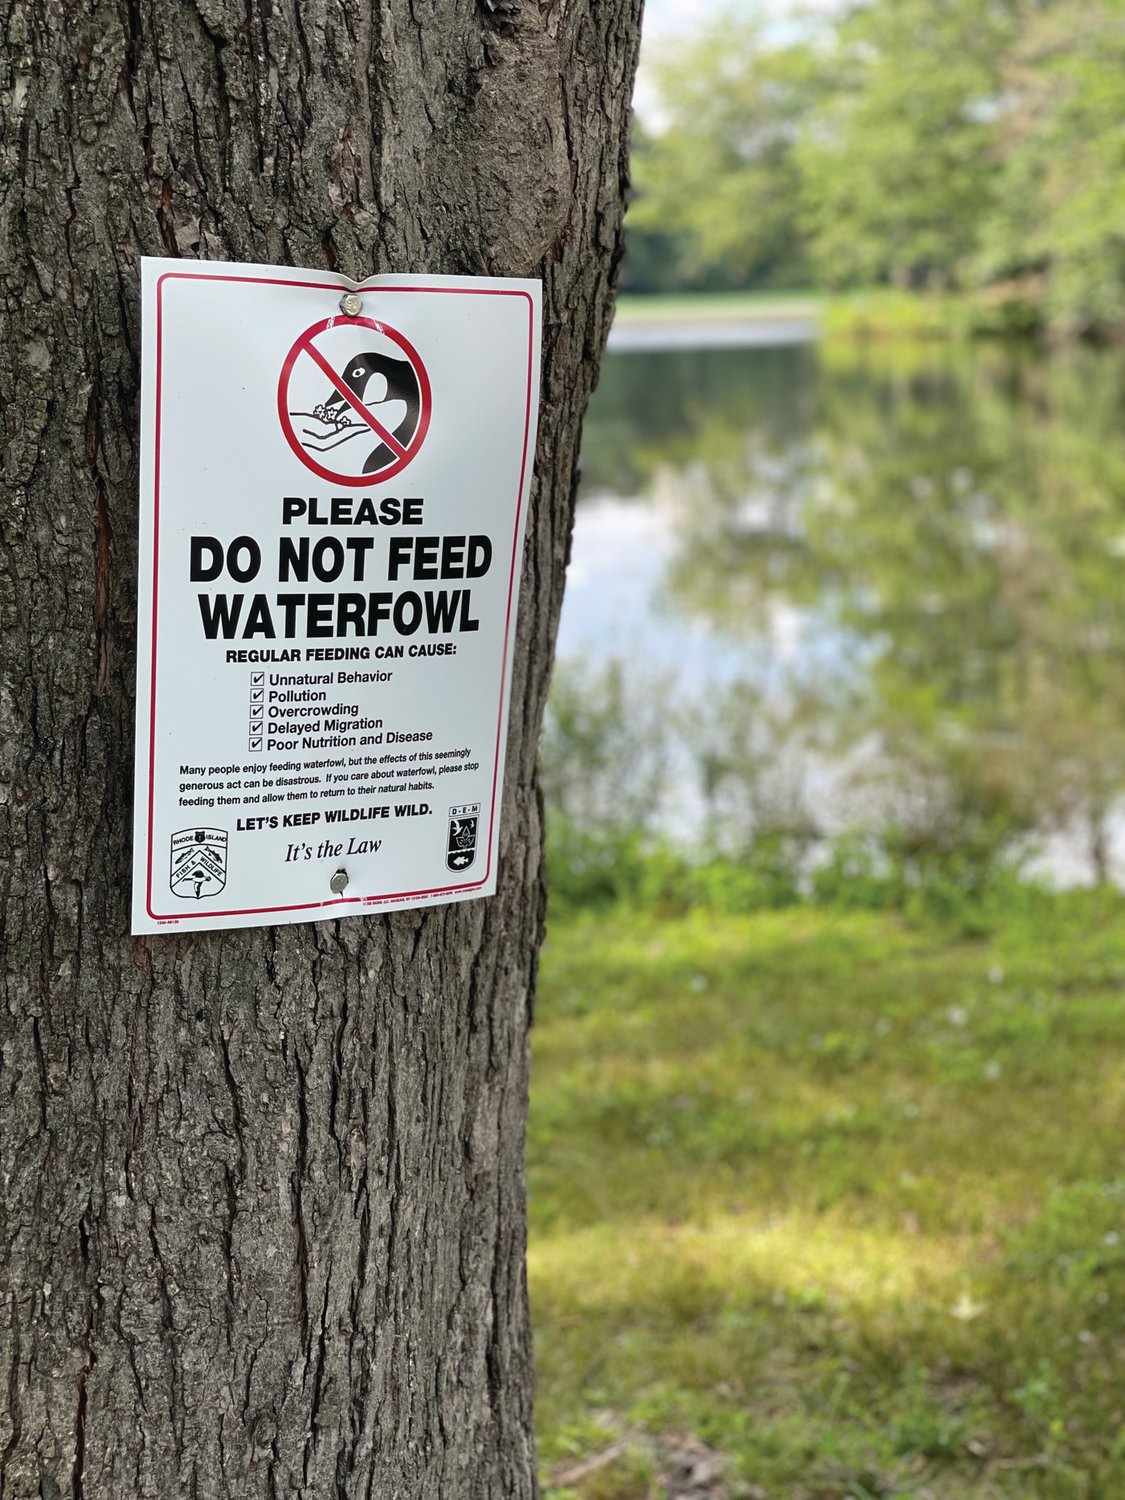 FOLLOW THE SIGN: A sign at Meshanticut Park advises visitors not to feed the ducks, geese and other birds at the site.